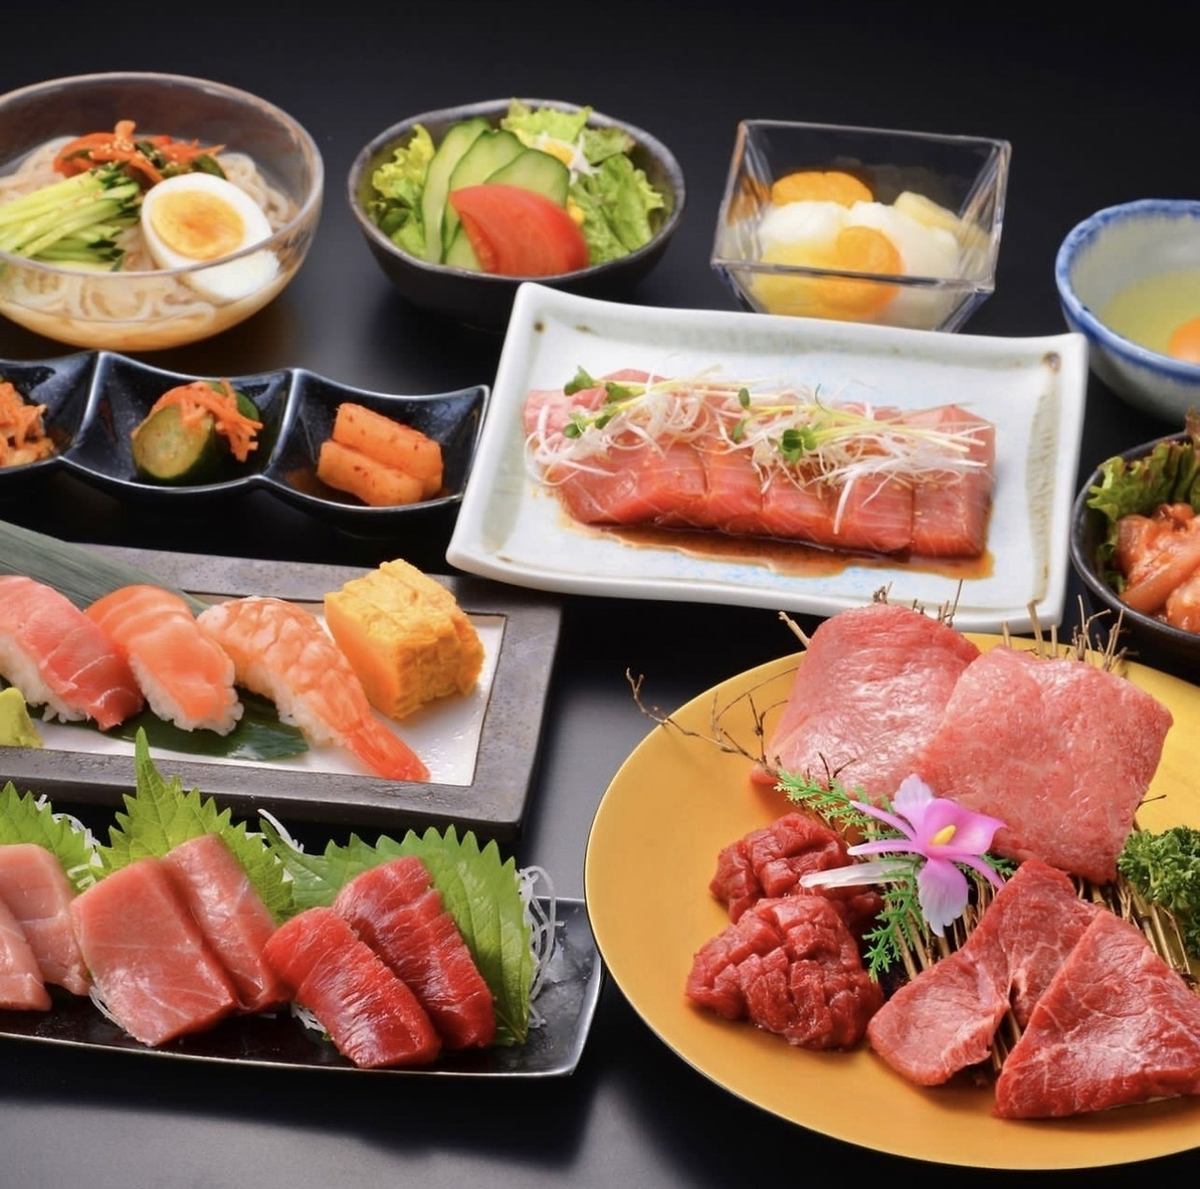 At our restaurant, you can enjoy seafood and yakiniku at the same time.